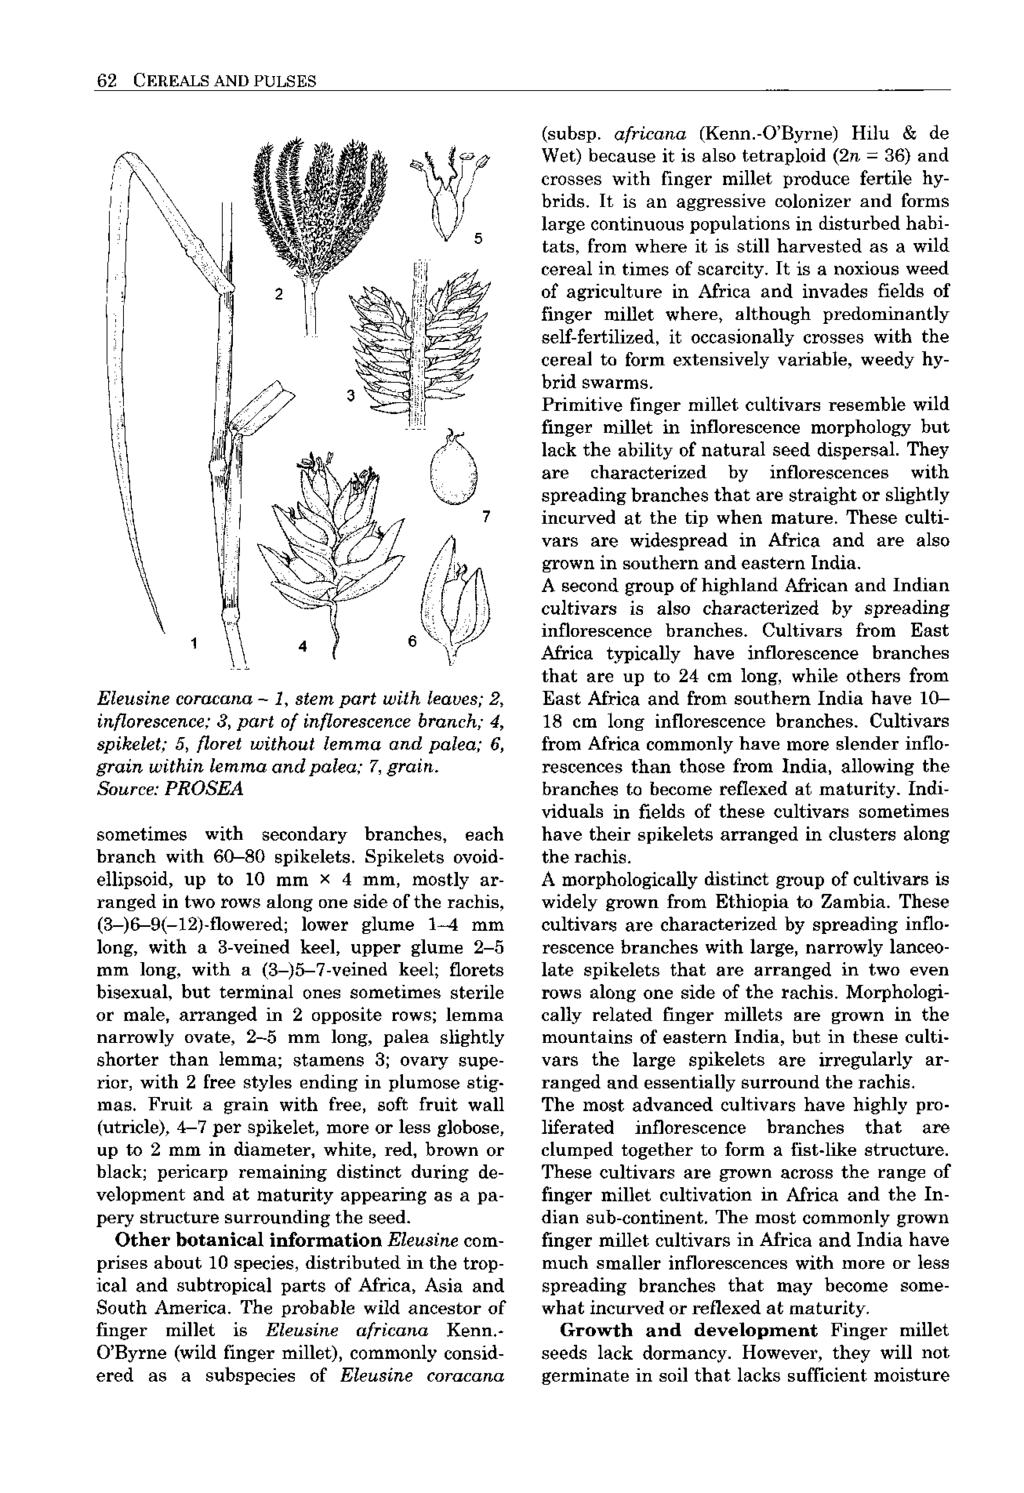 62 CEREALS AND PULSES Eleusine coracana - 1, stem part with leaves; 2, inflorescence; 3, part of inflorescence branch; 4, spikelet; 5, floret without lemma and palea; 6, grain within lemma and palea;